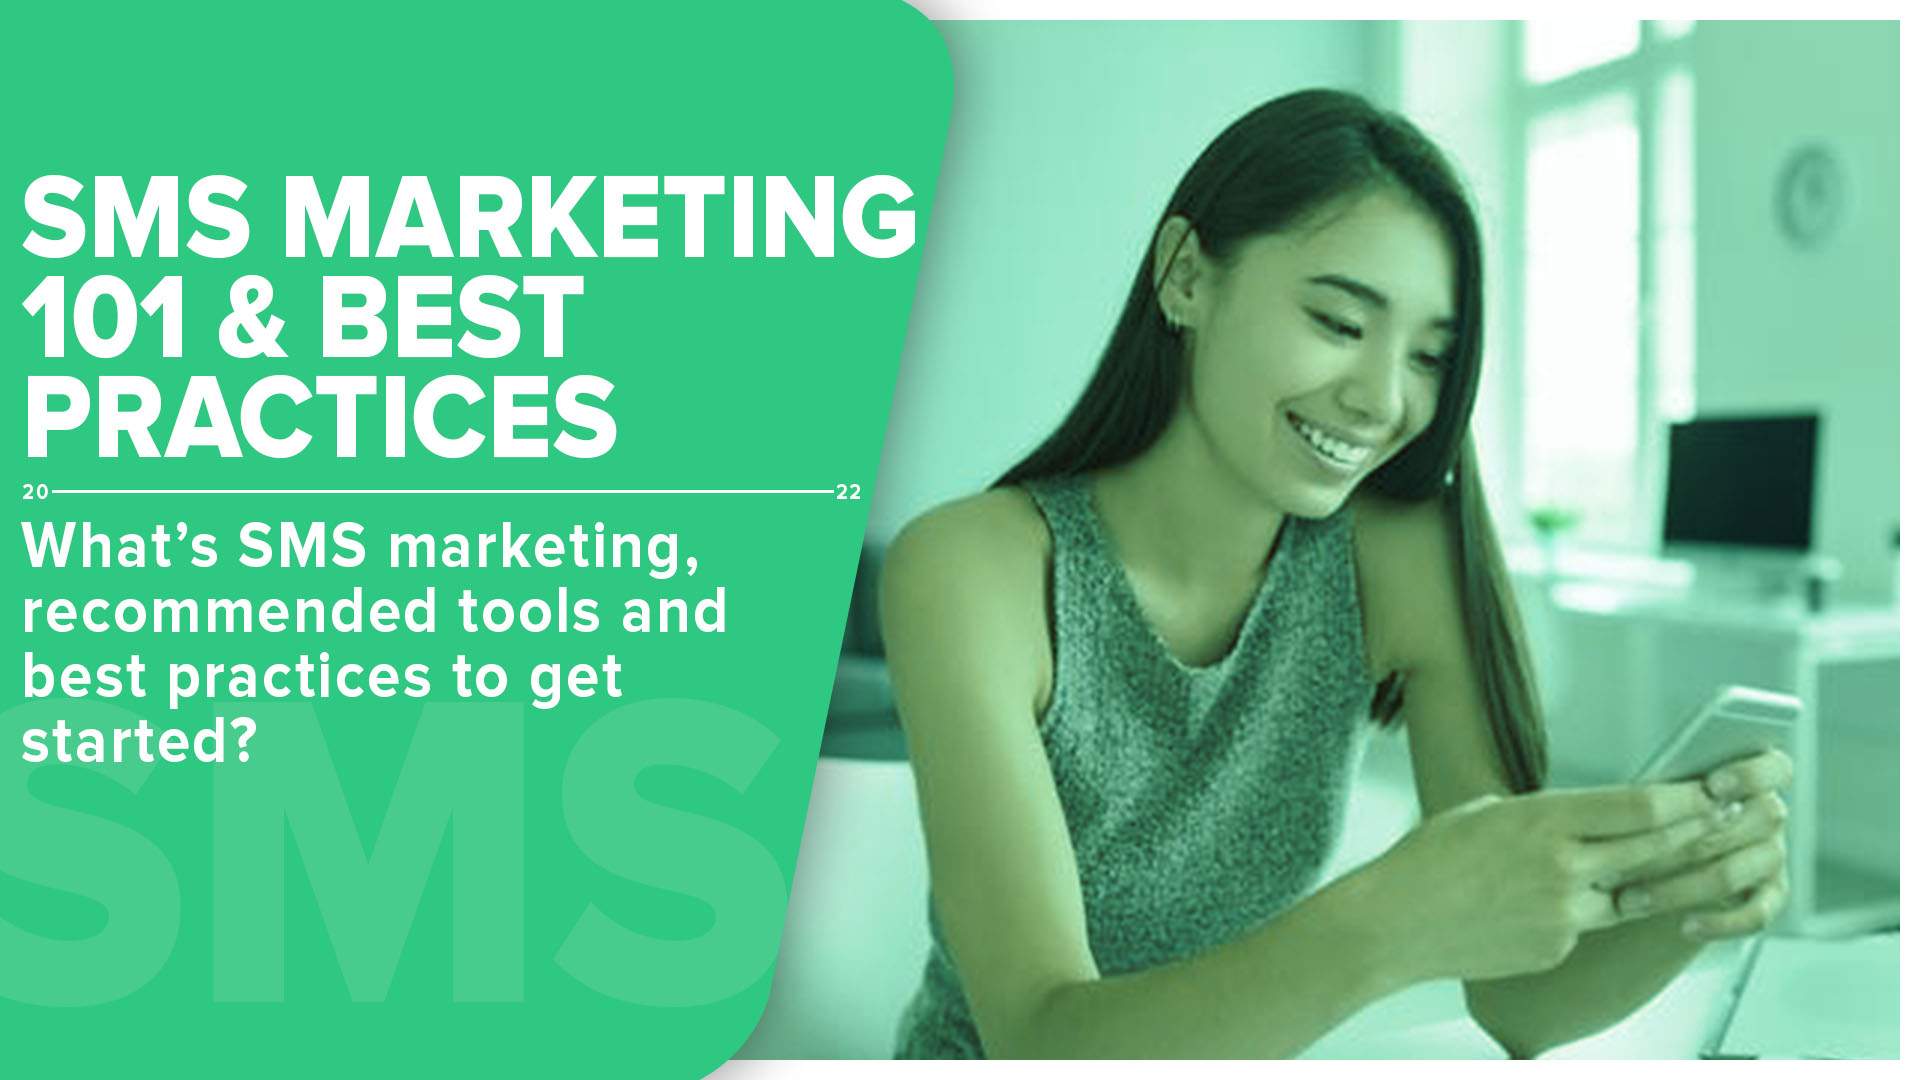 SMS marketing blog post cover image with woman texting via the phone